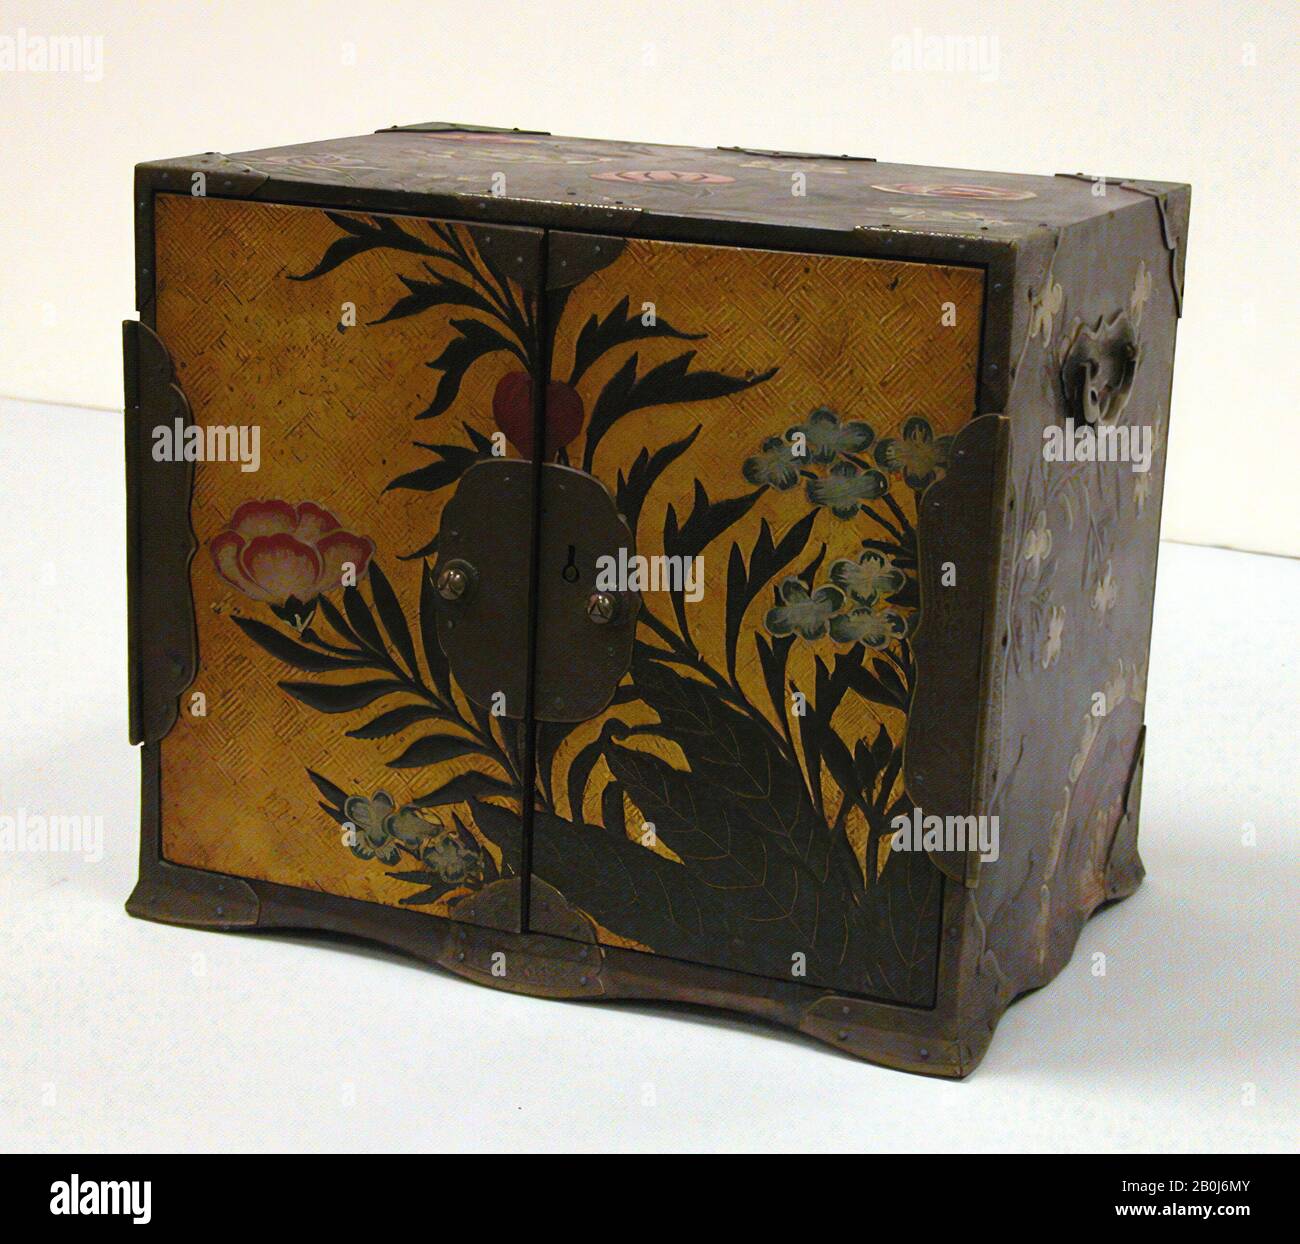 Cabinet, Japan, 19th century, Japan, Lacquer decorated with gold, H. 9 in. (22.9 cm); W. 10 1/4 in. (26 cm); D. 7 1/8 in. (18.1 cm), Lacquer Stock Photo